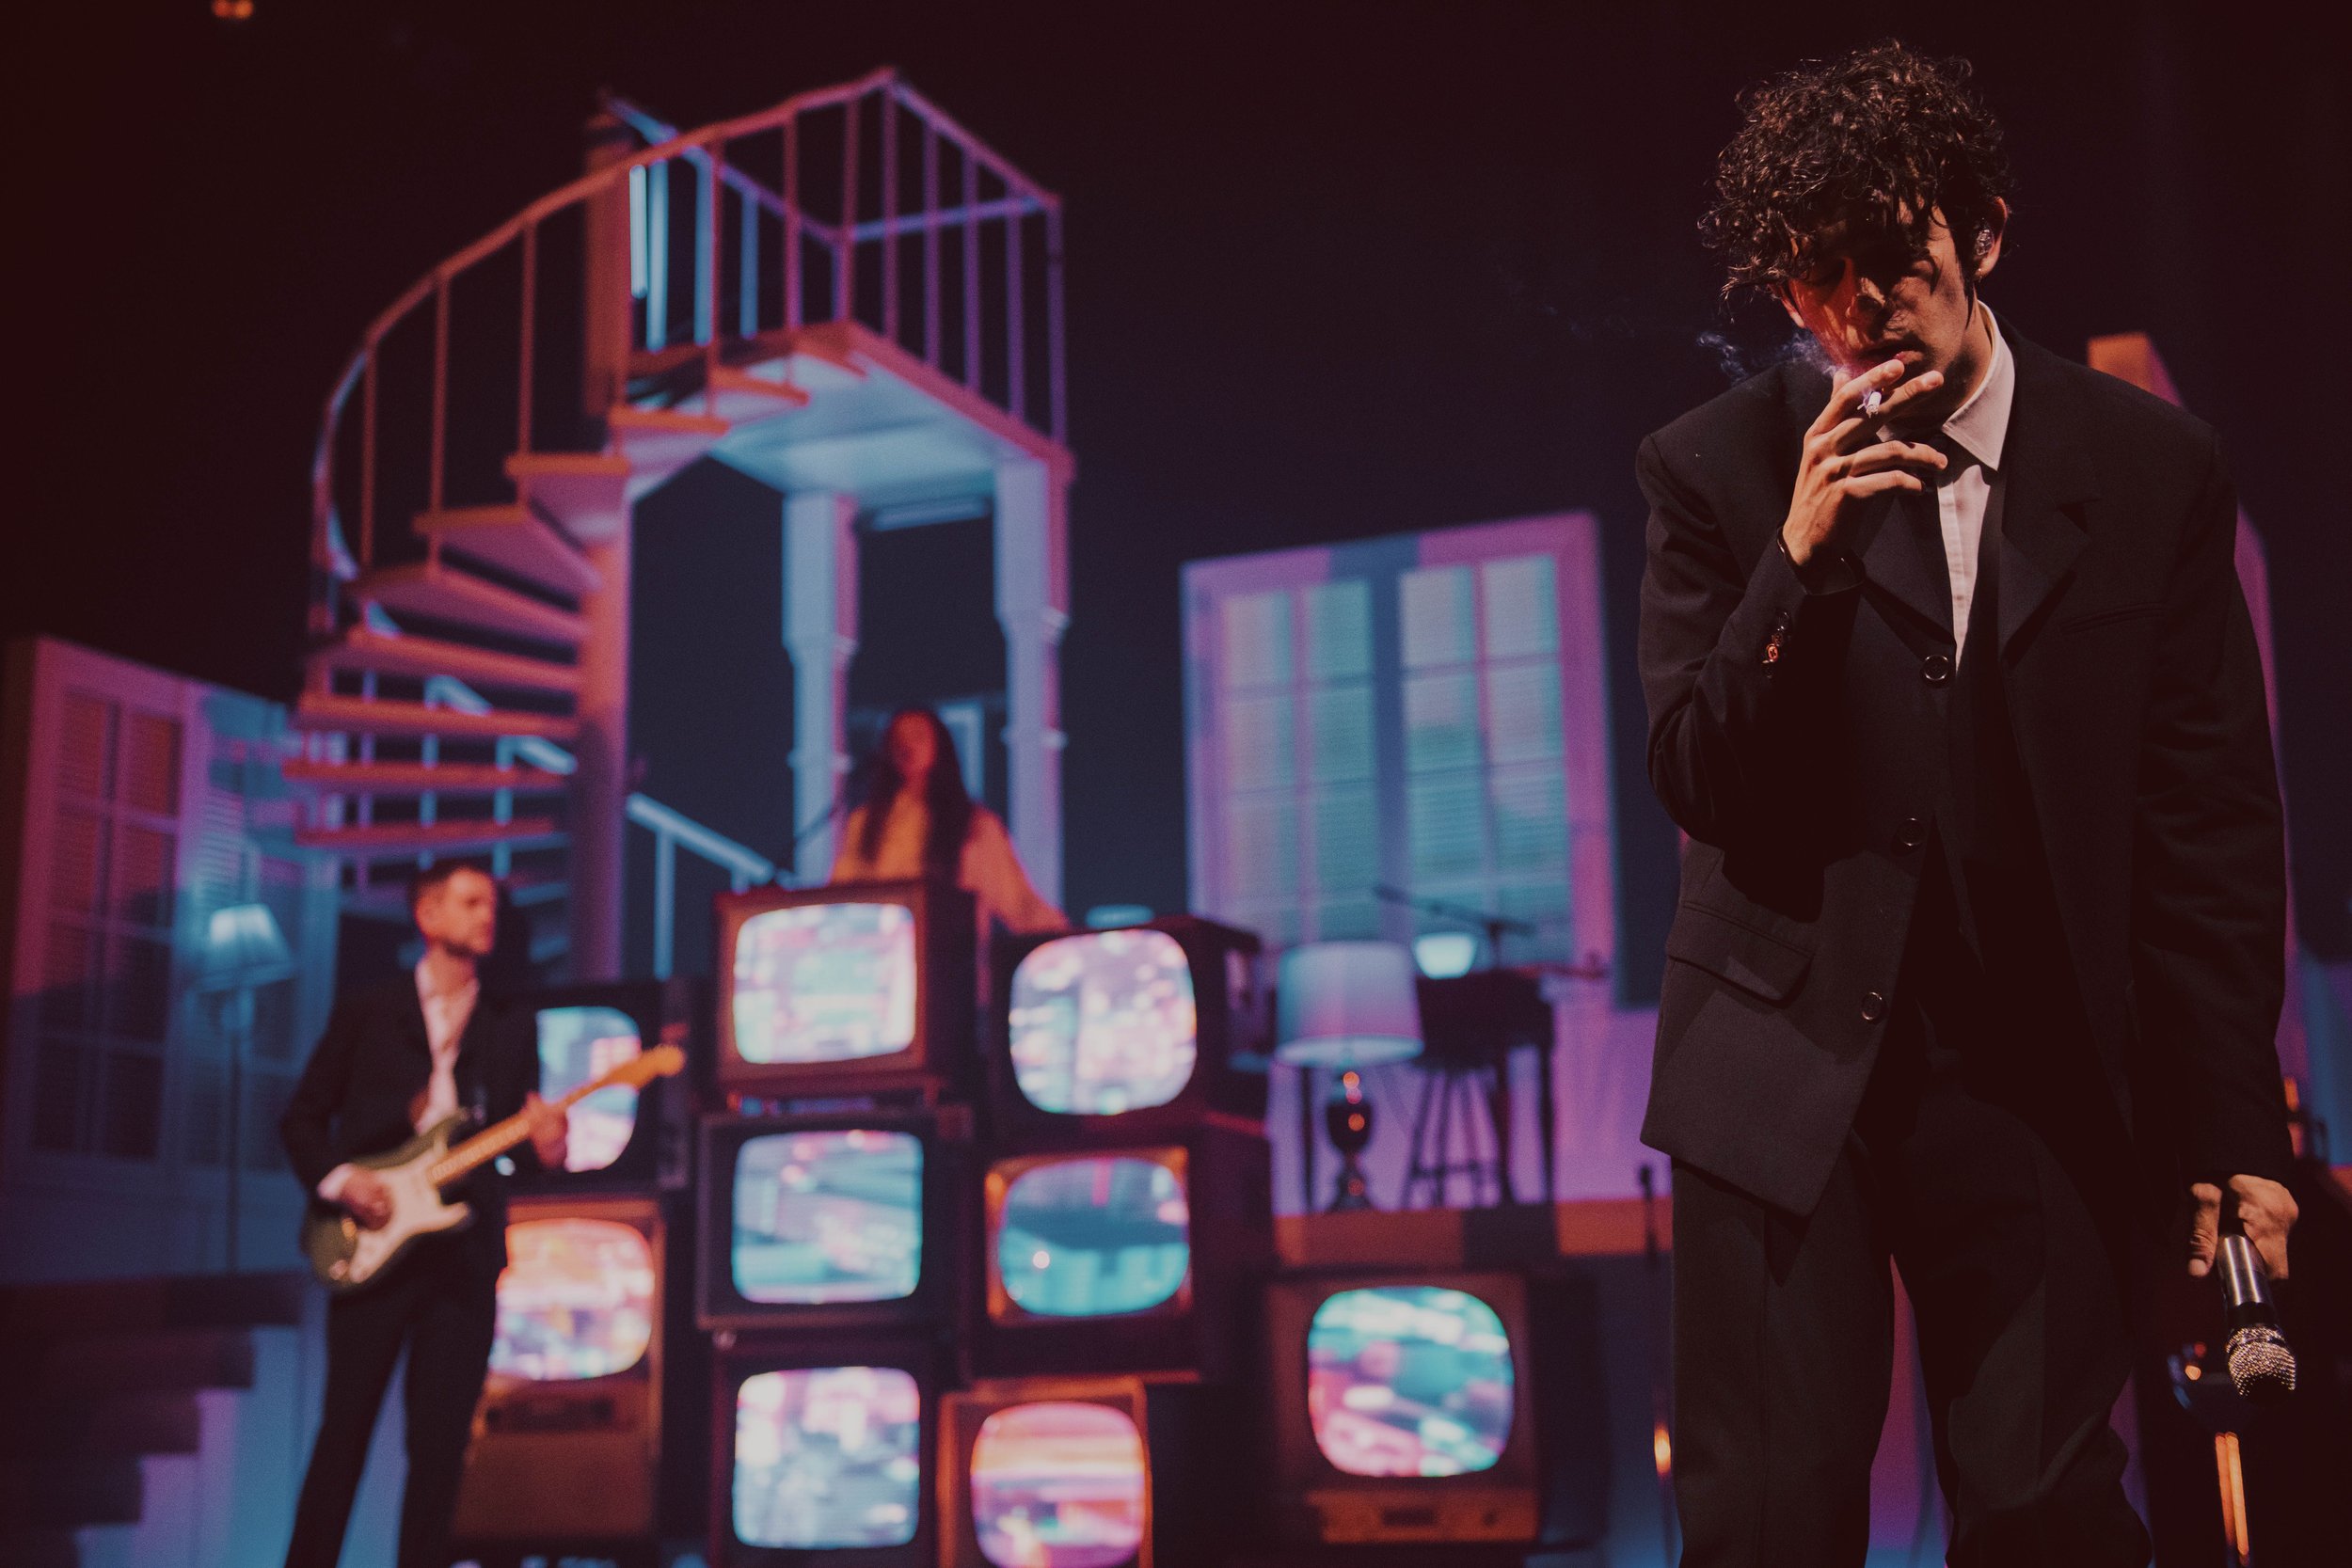 Review The 1975’s show in Grand Prairie was a genuine work of art